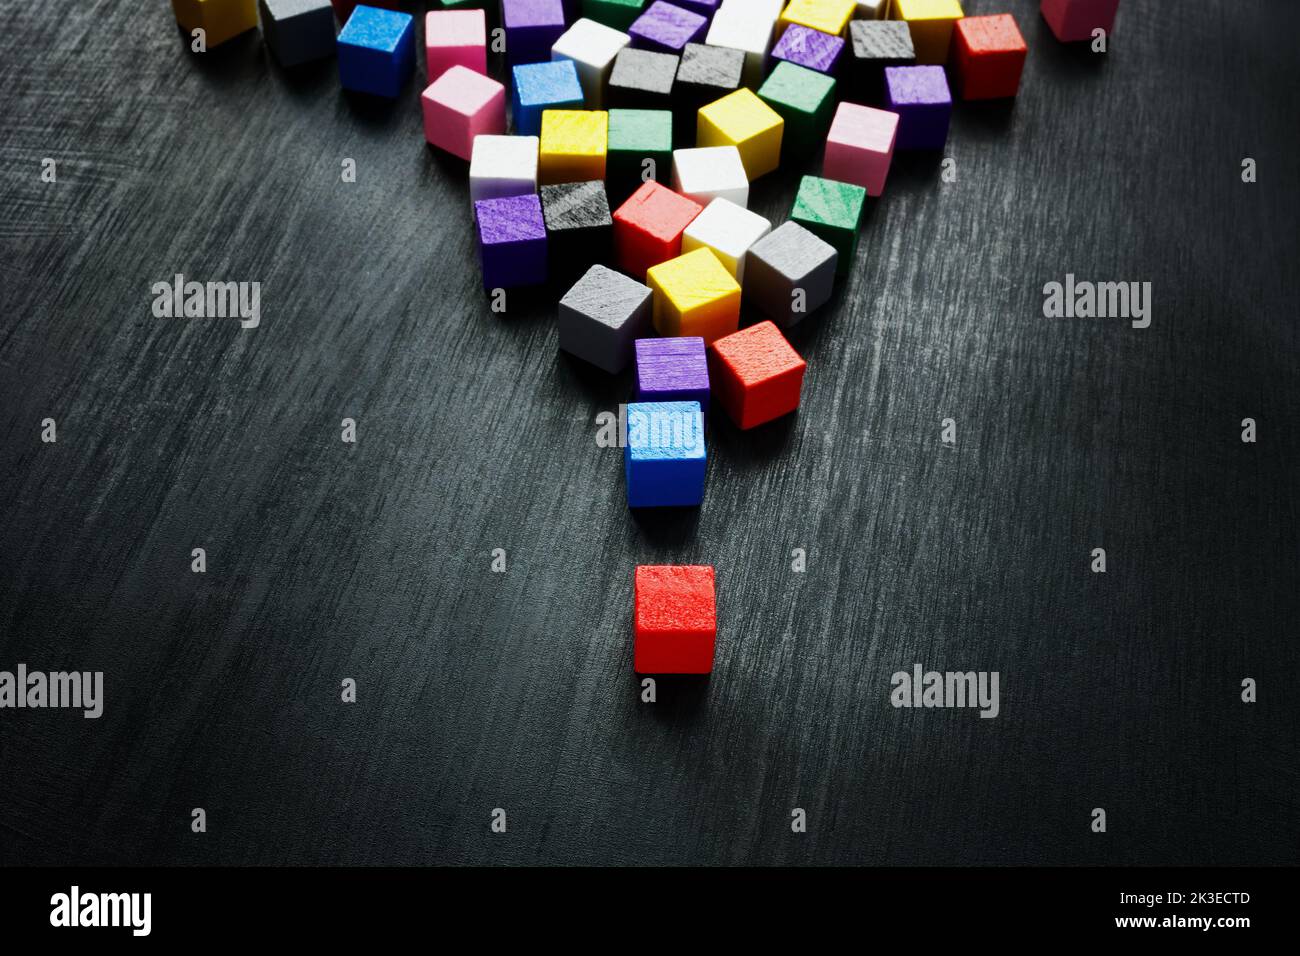 Crowd of colorful cubes and red one as a leader. Leadership concept. Stock Photo